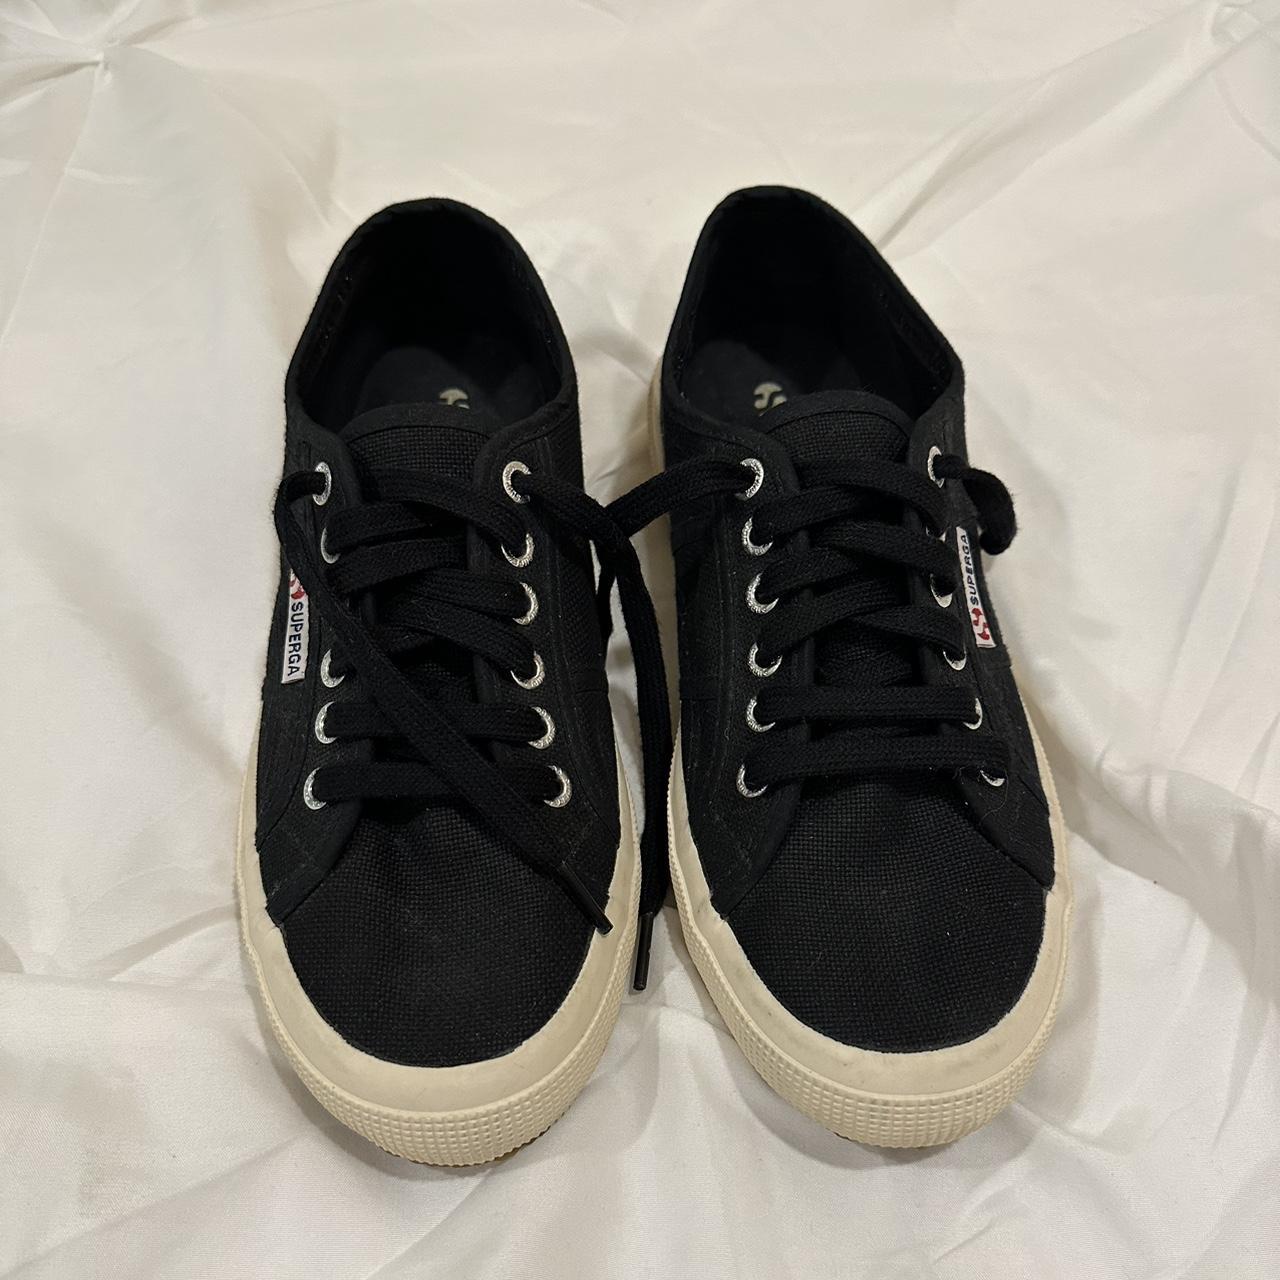 Superga sneakers • black classic style • size 40... - Depop